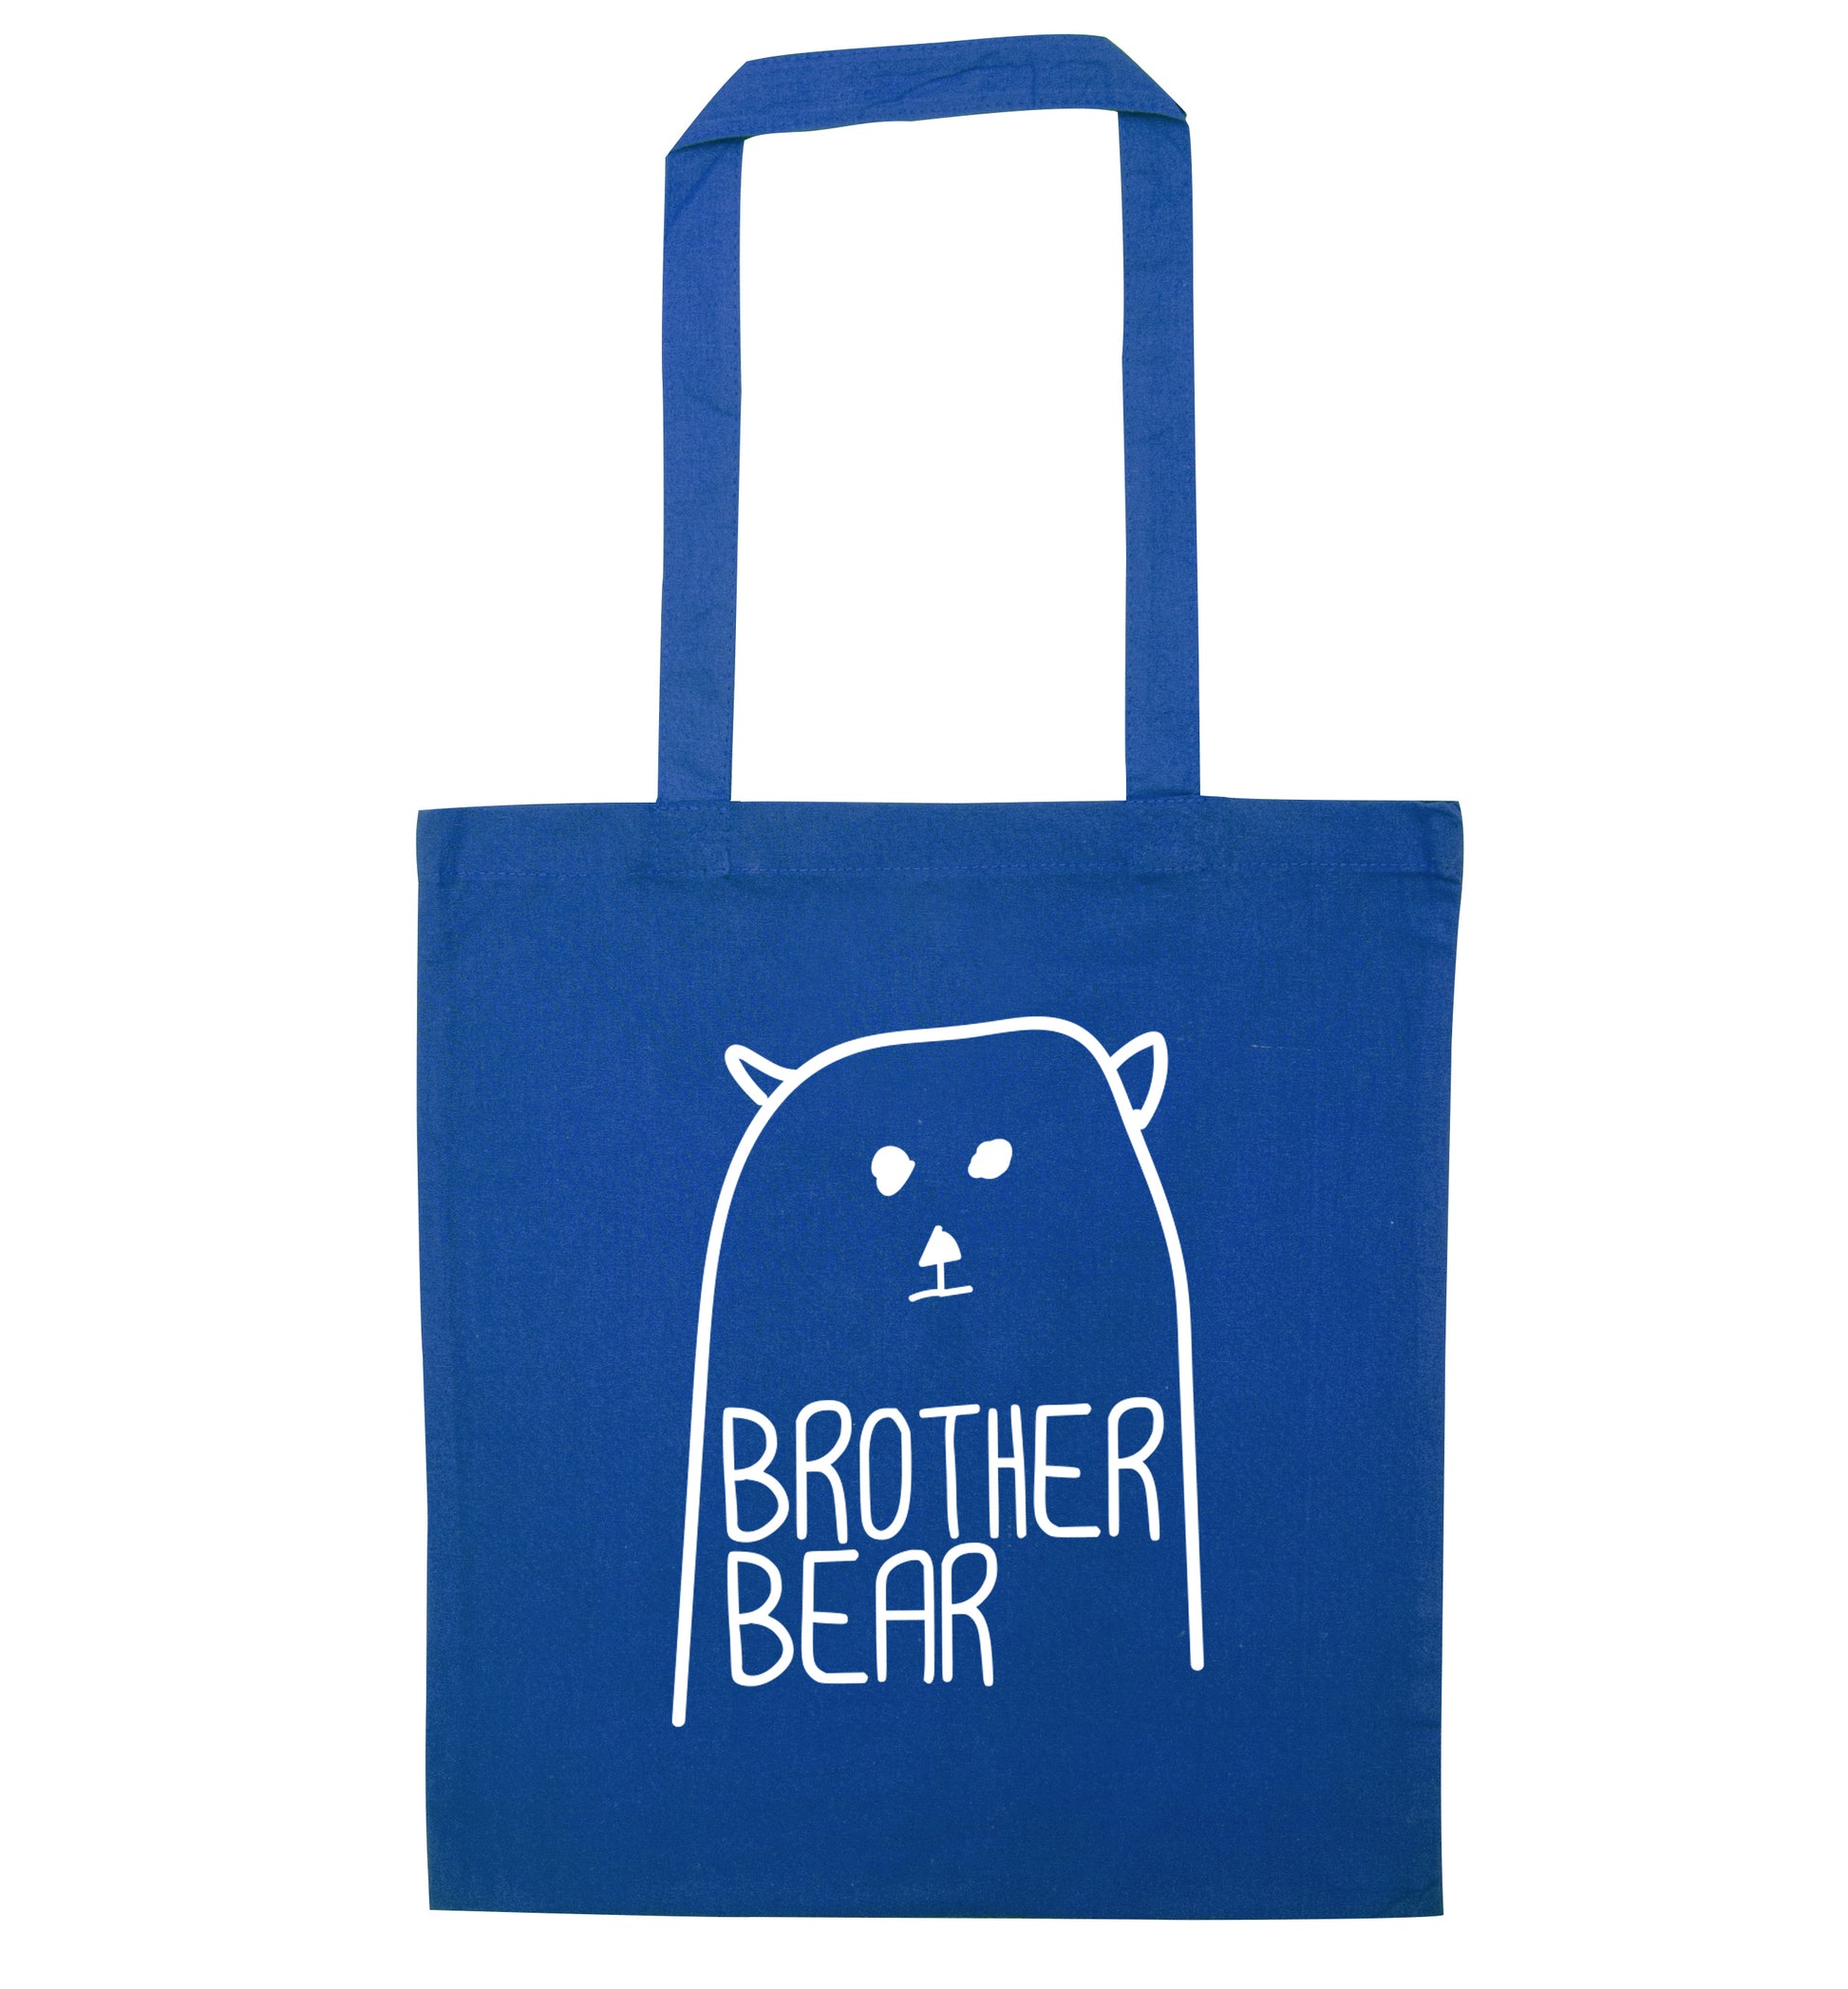 Brother bear blue tote bag